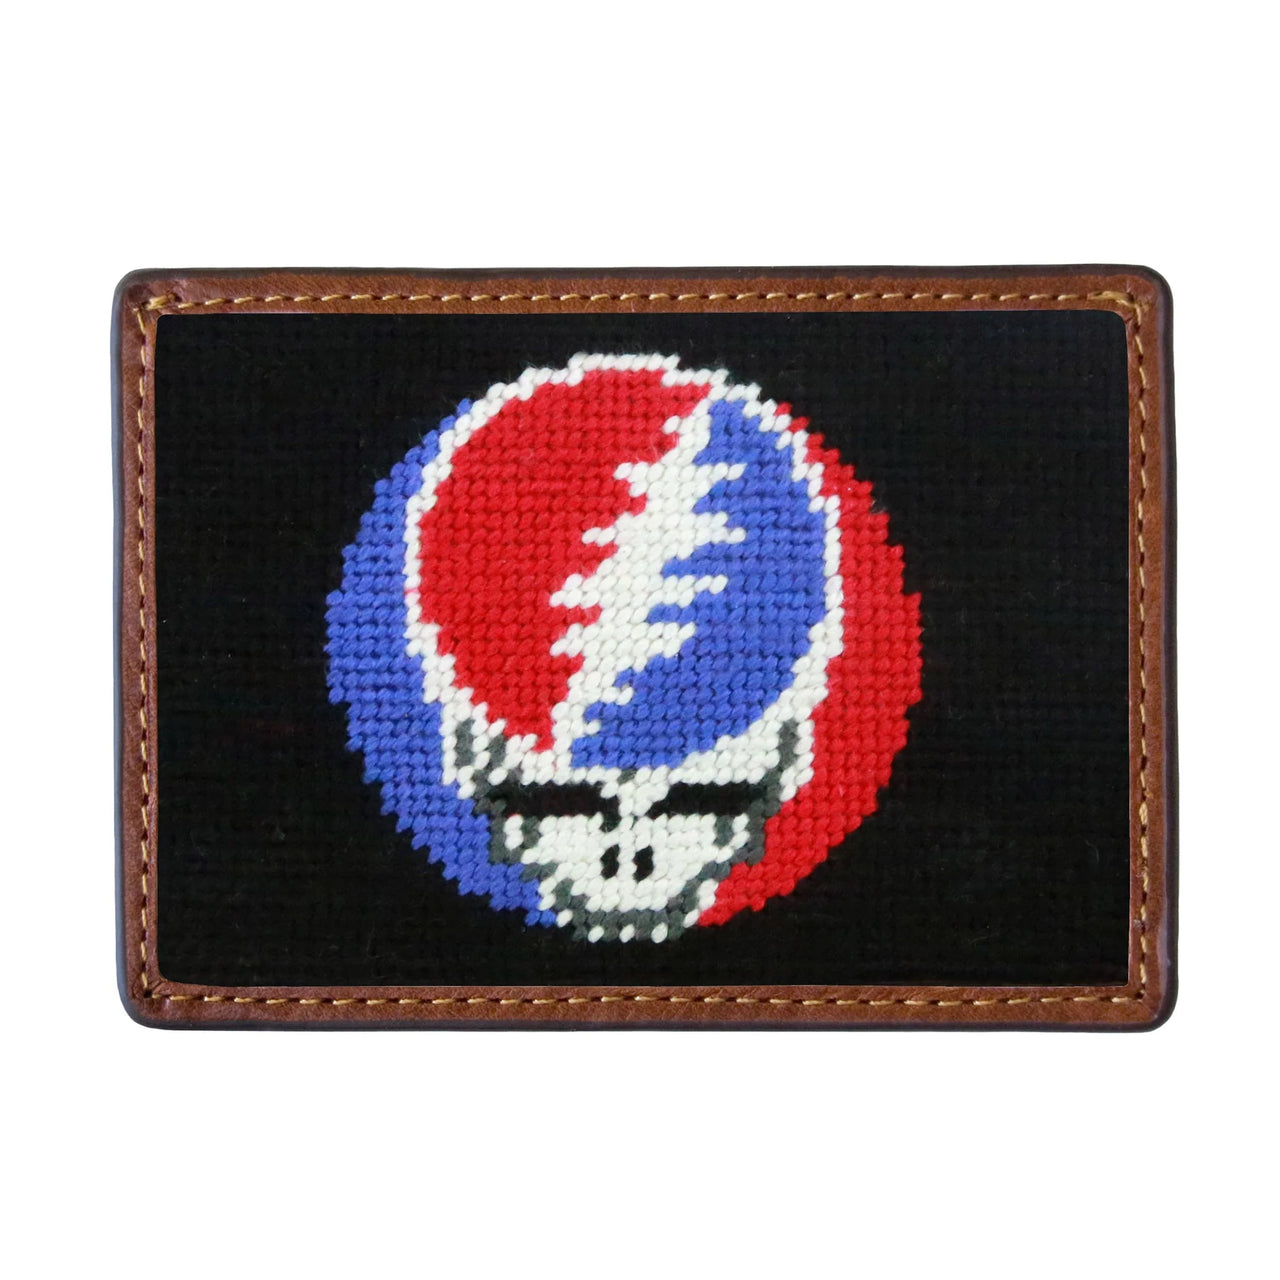 Smathers & Branson Steal Your Face Card Wallet (Black)